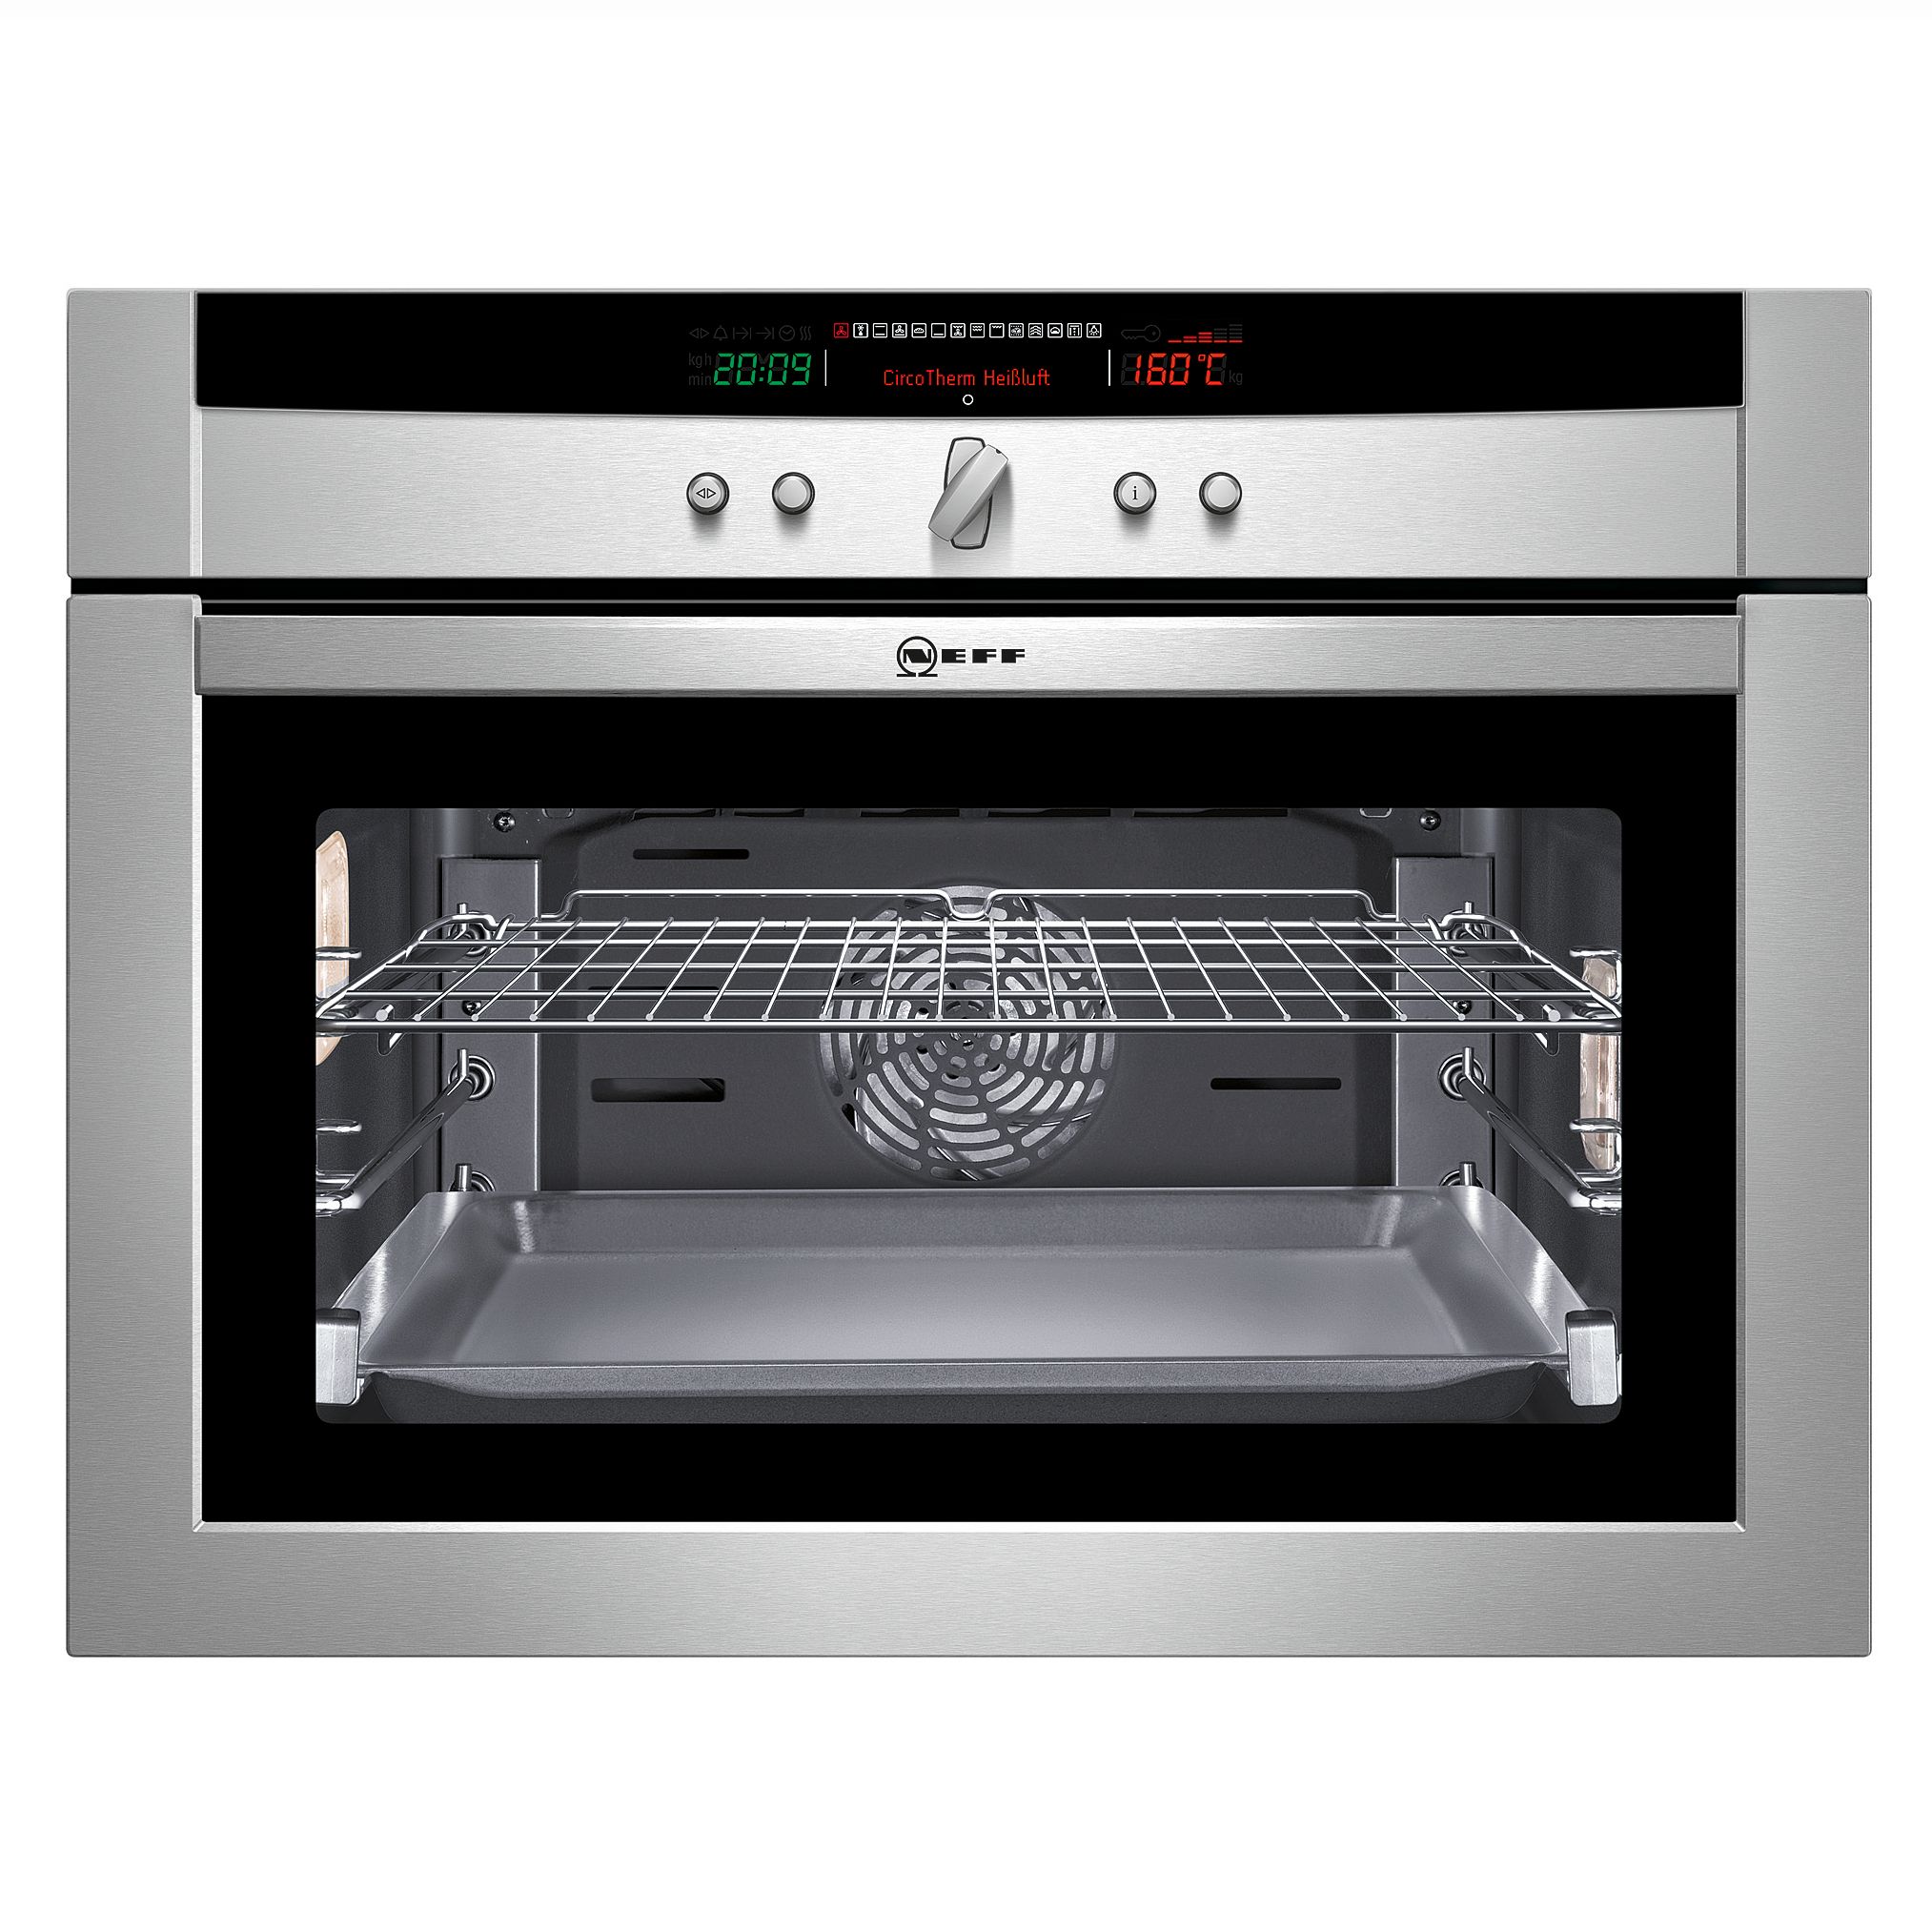 Neff C17E74N0GB Compact Electric Oven, Stainless Steel at John Lewis